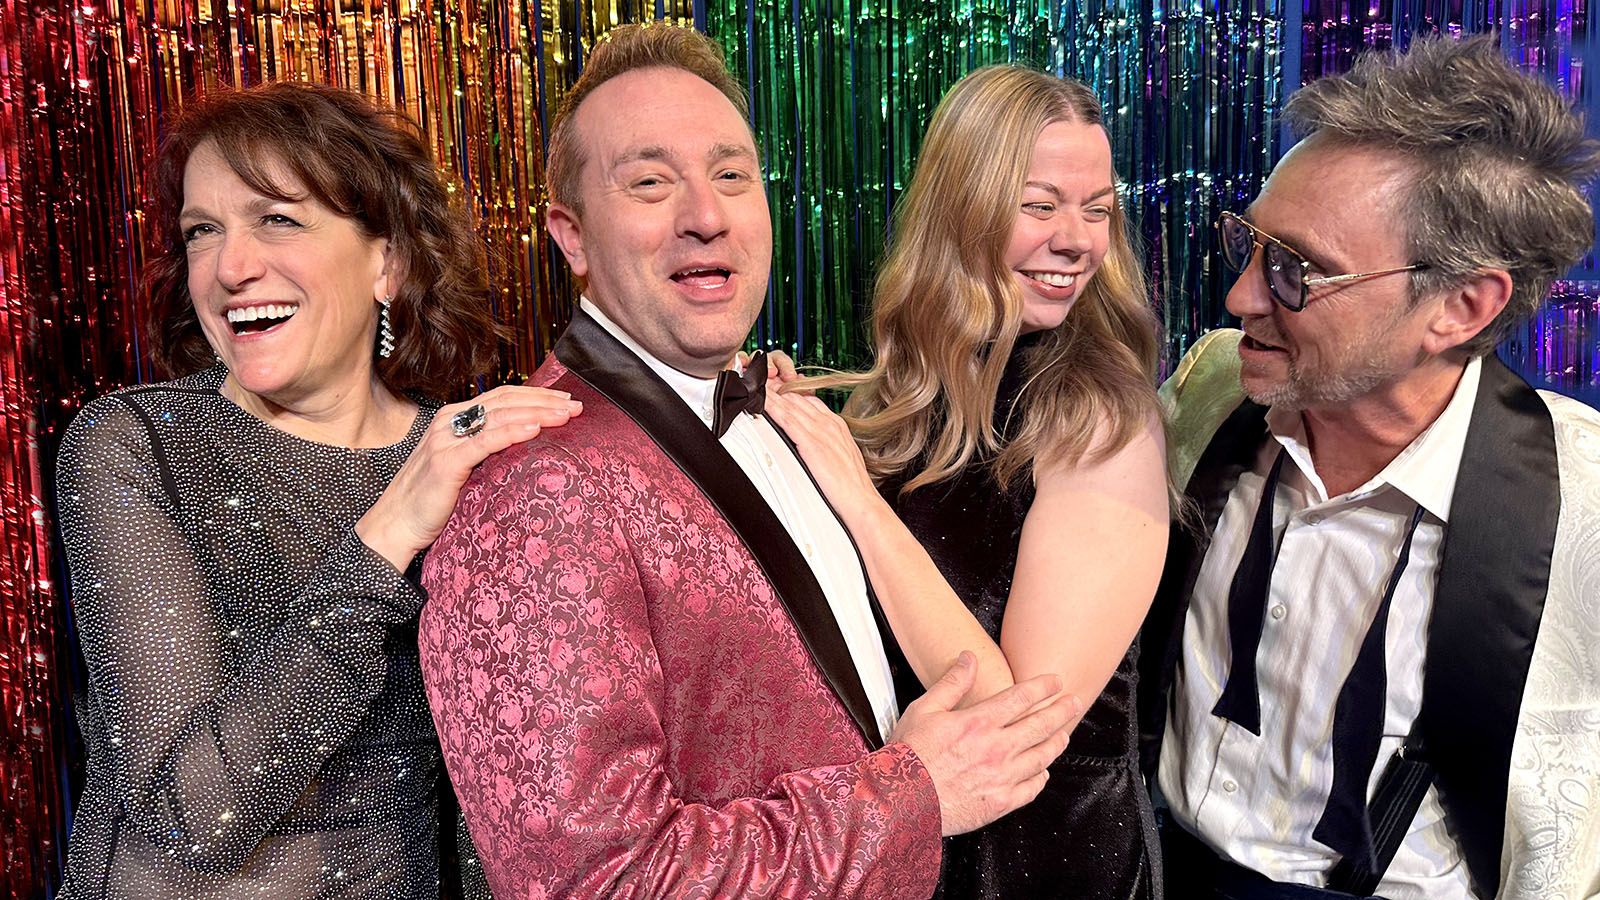 Portraying Broadway actors in the upcoming show The Prom, a collaboration between Fort Wayne Youtheatre and First Presbyterian Theater, will be, from left, Amy Ross, Chris Rasor, Heather Closson, and Todd Frymier.